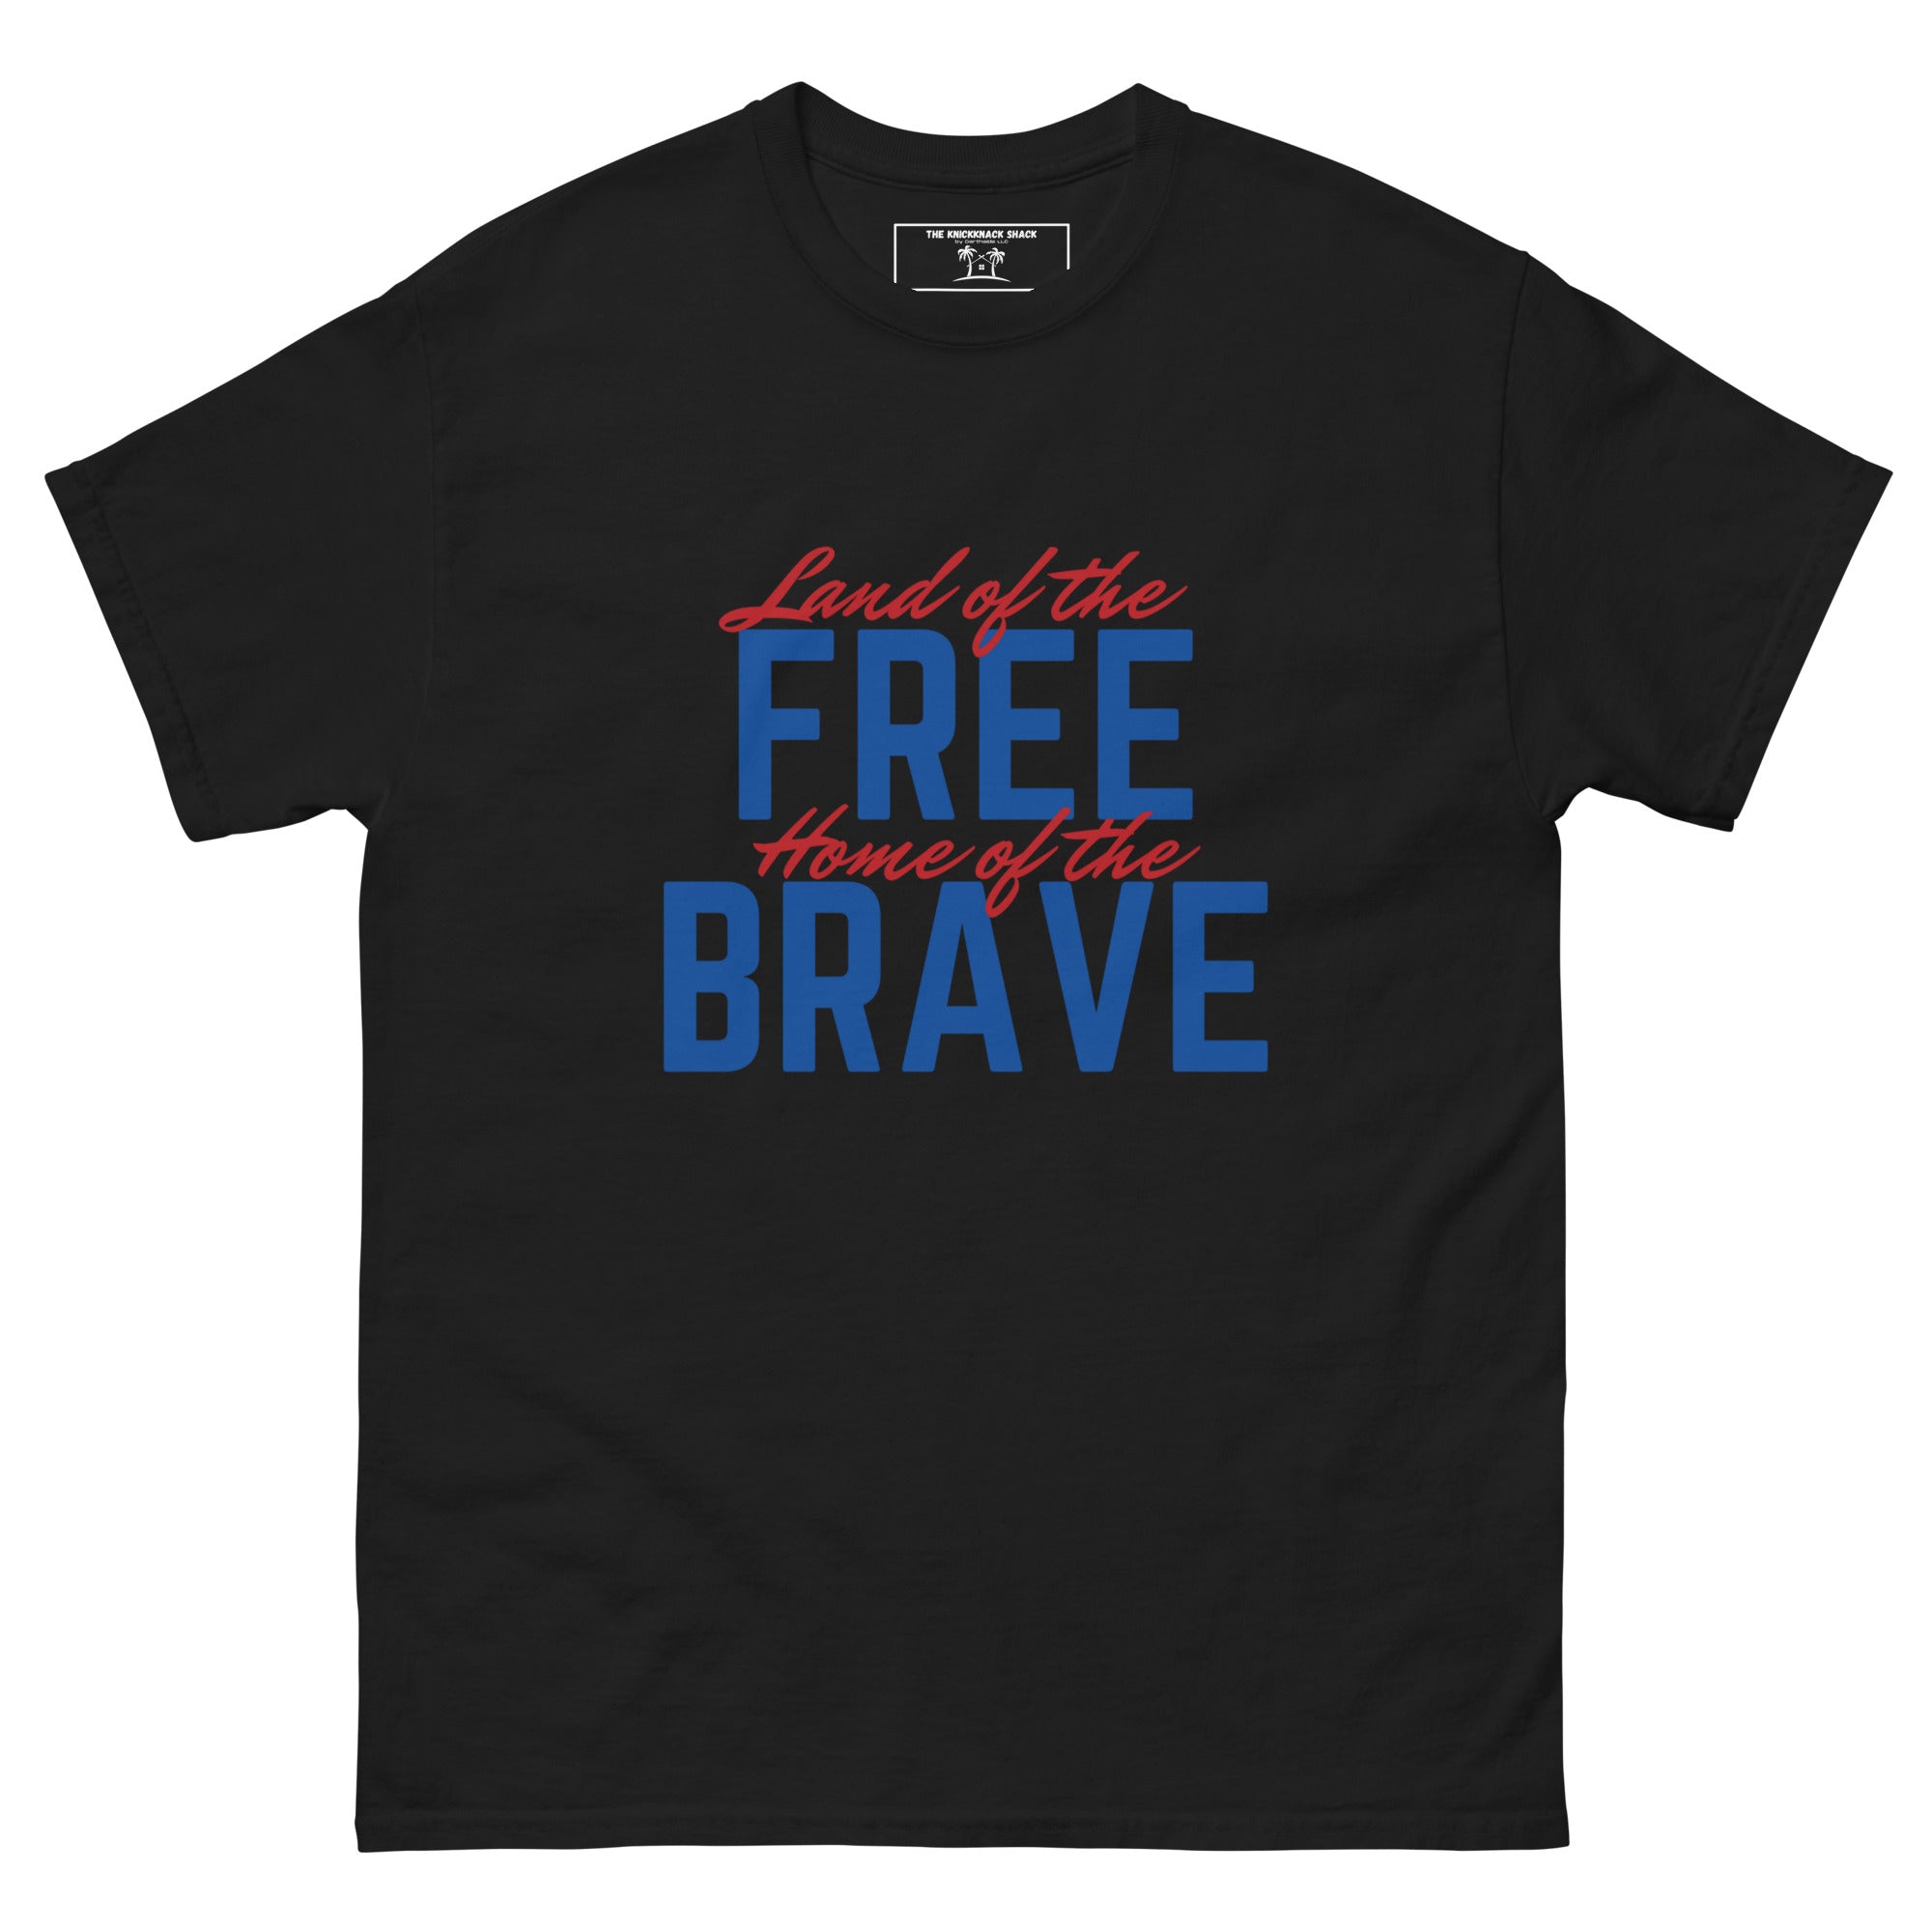 Classic Tee - Land of the Free (Dark Colors)